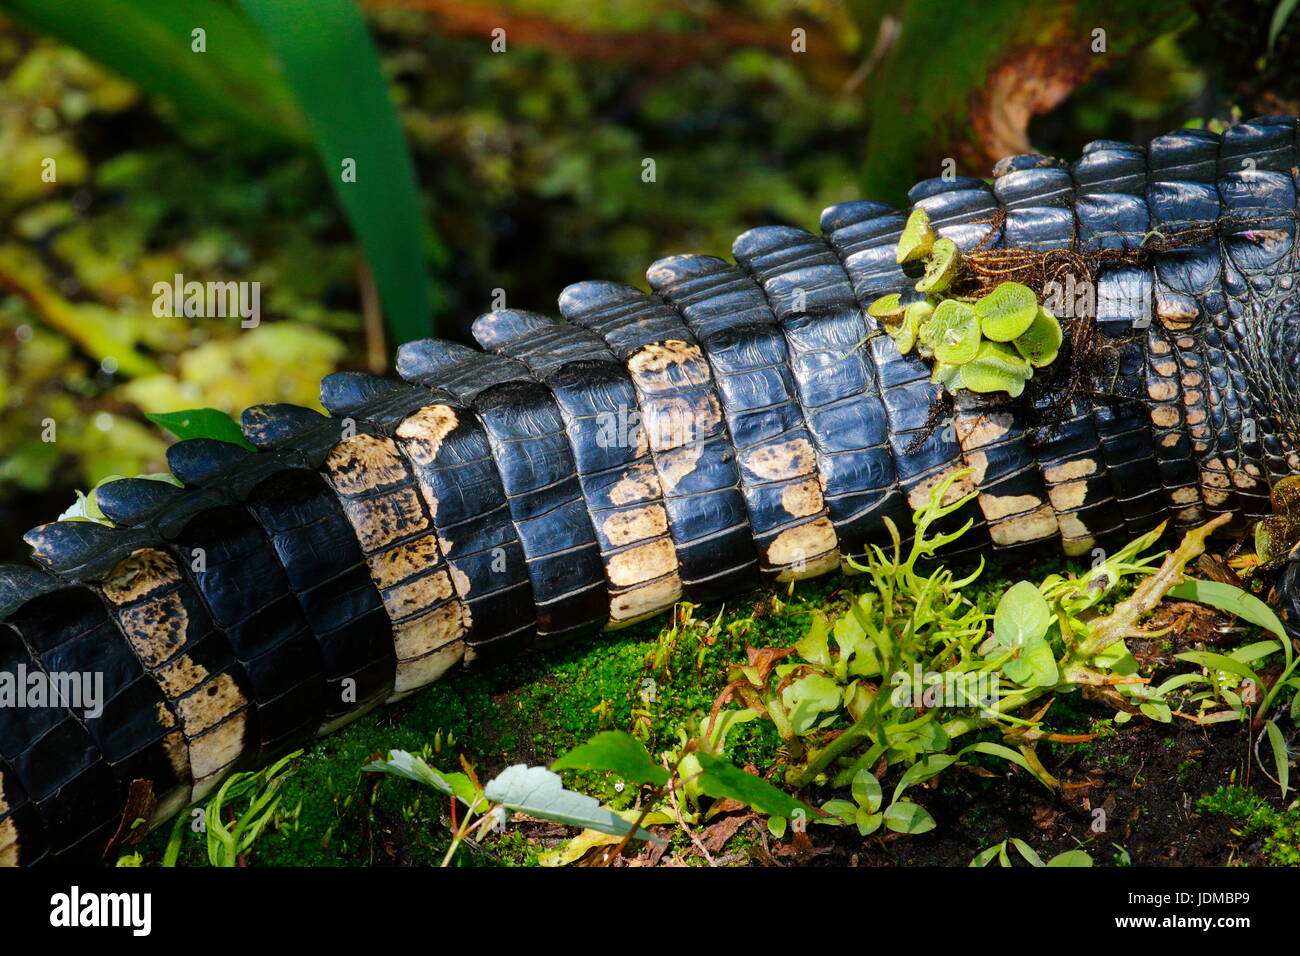 The tail of an American alligator, Alligator mississippiensis. Stock Photo